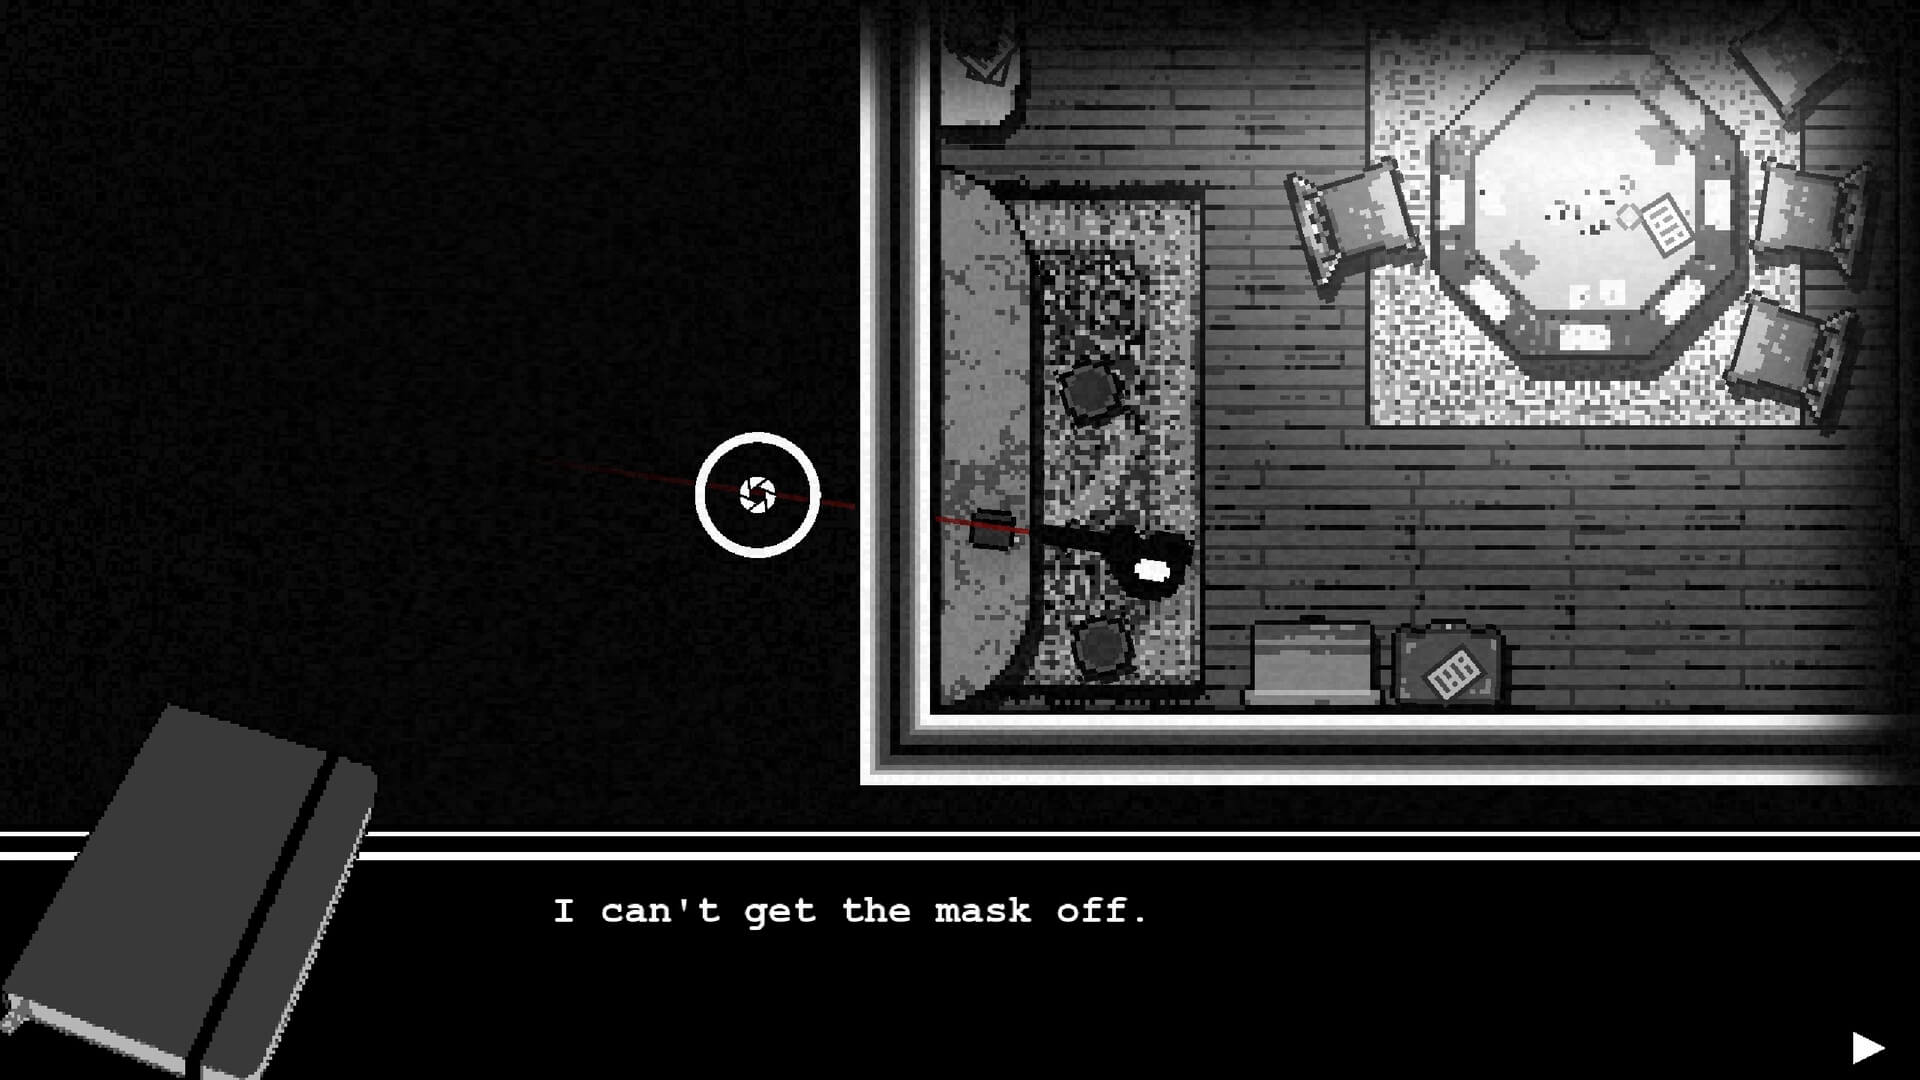 A dialogue box saying "I can't get the mask off" in Otxo